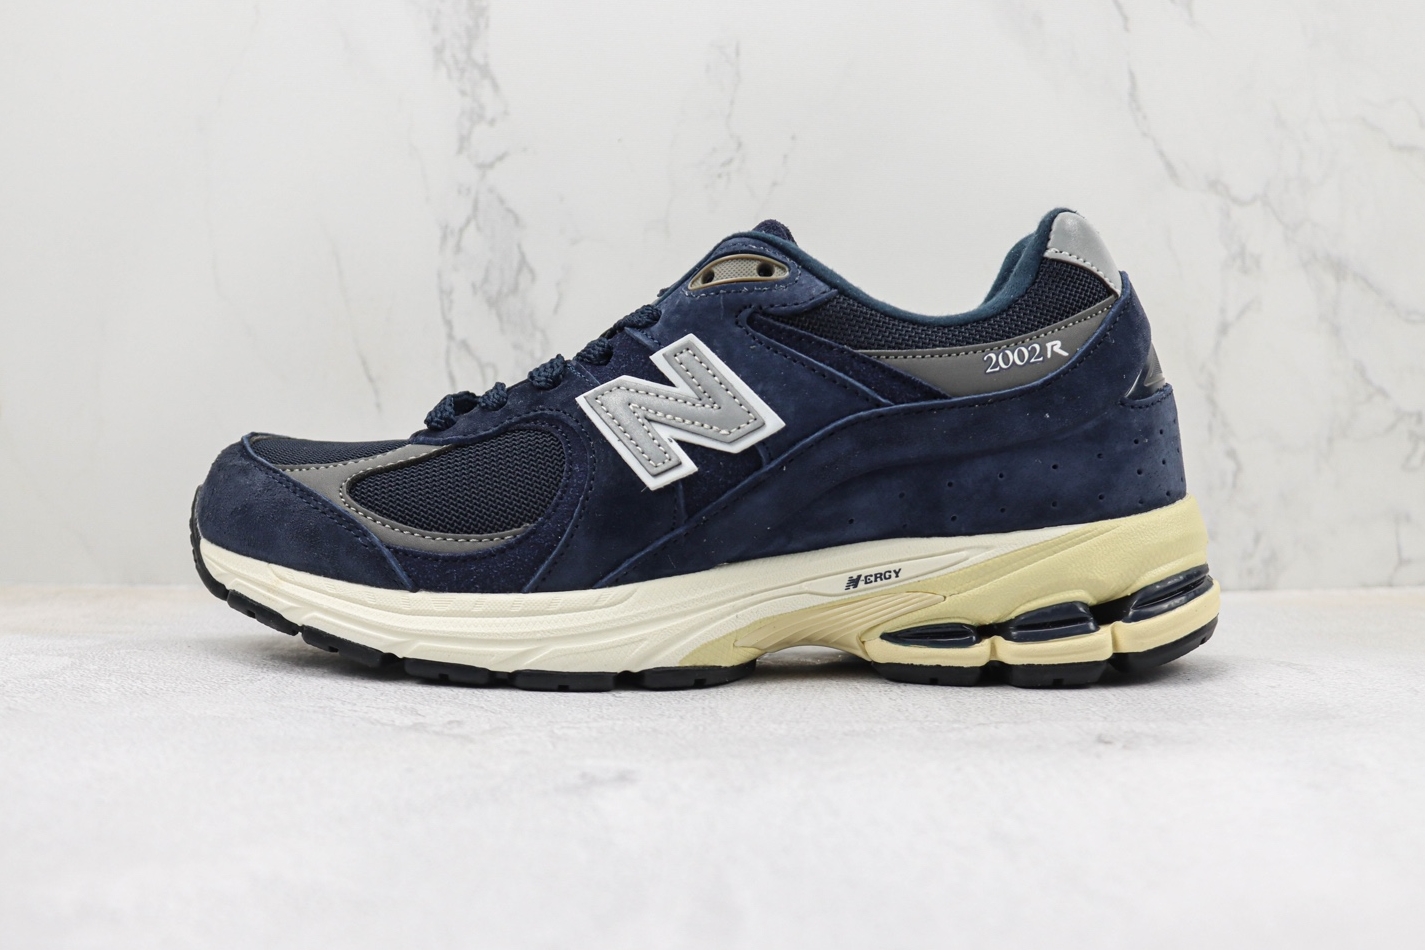 New Balance 2002R 'Eclipse Castlerock' M2002RCA - Stylish and Comfortable Sneakers